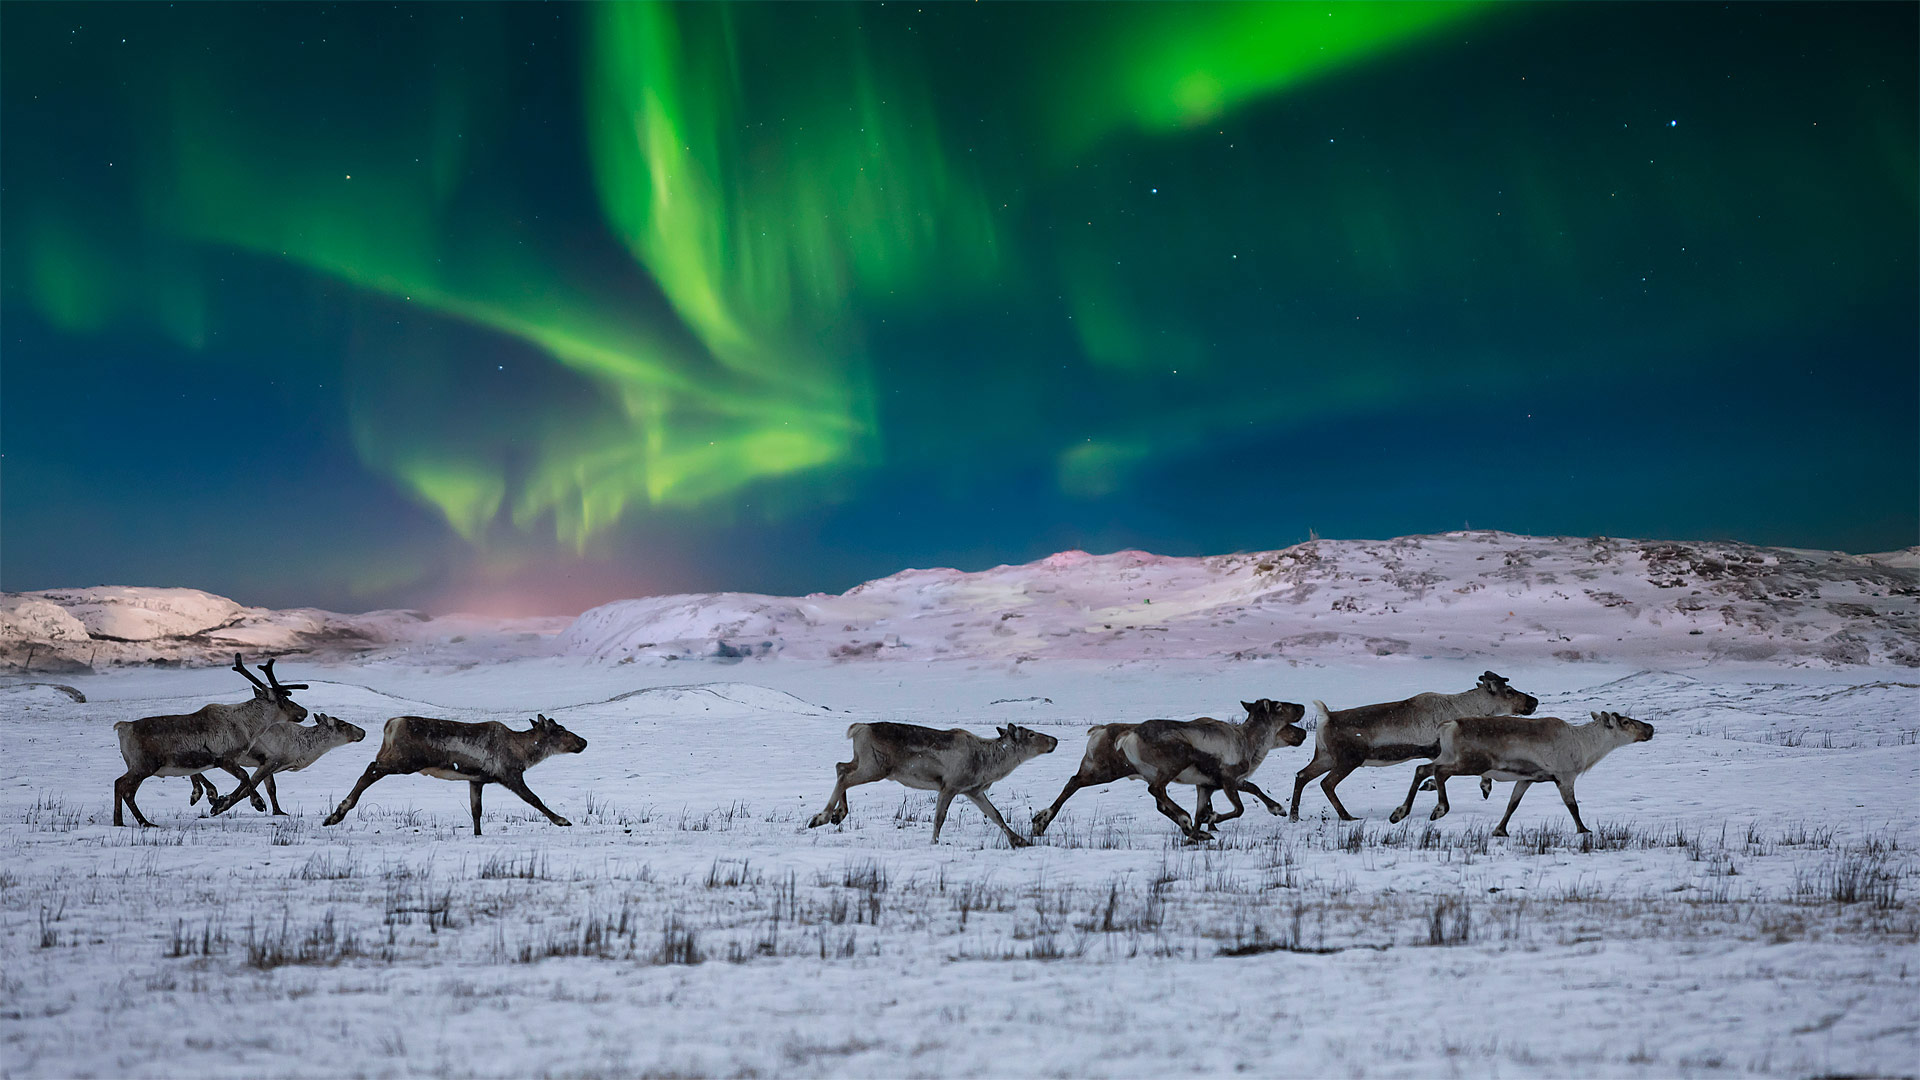 Northern lights and wild reindeer on the tundra in Norway - Anton Petrus/Getty Images)